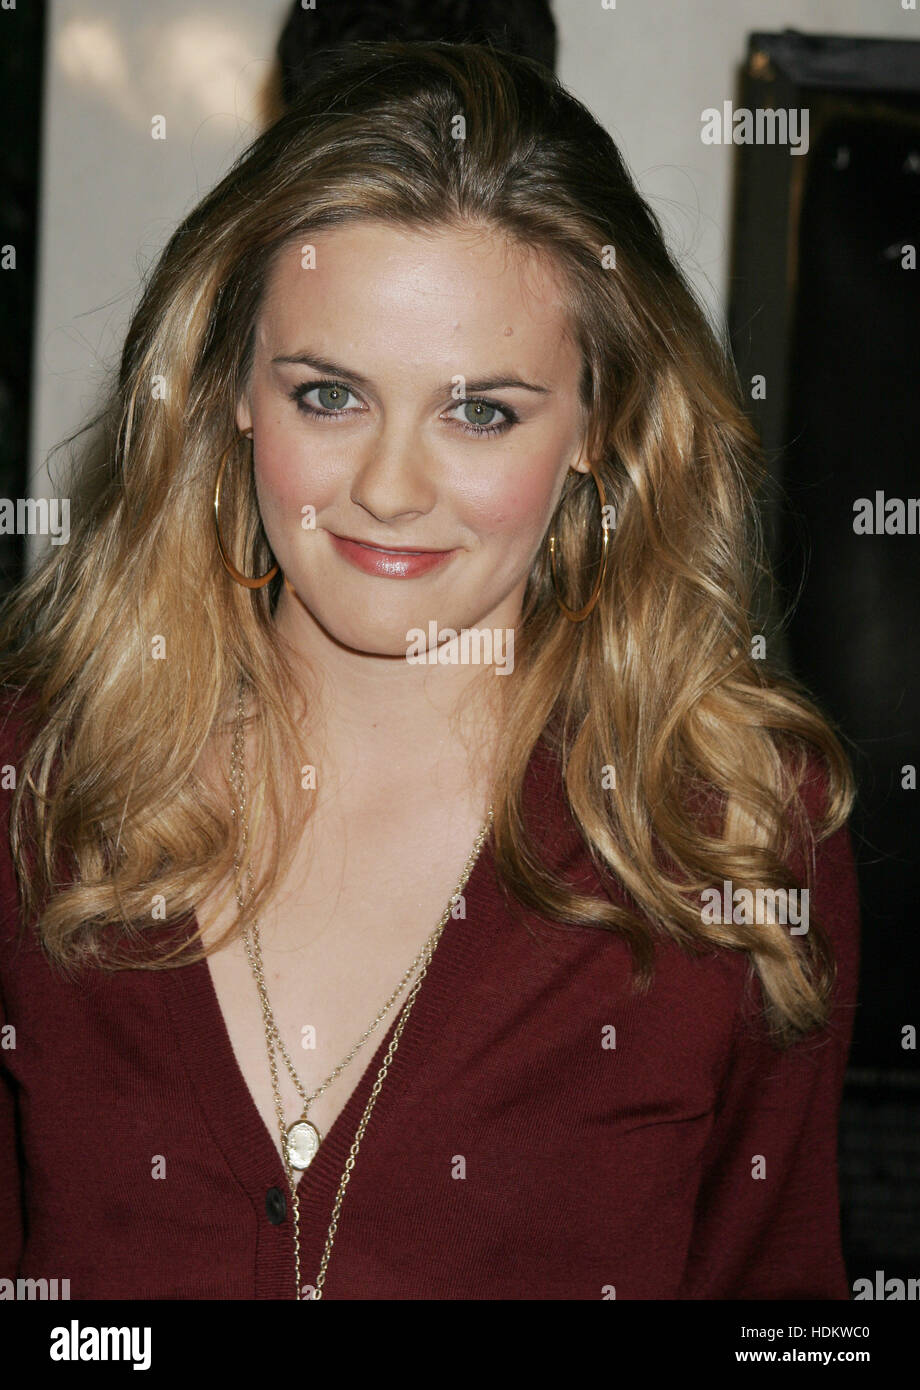 Alicia Silverstone at the premiere for 'Ray' on October 19, 2004 in Los Angeles, California. Photo credit: Francis Specker Stock Photo